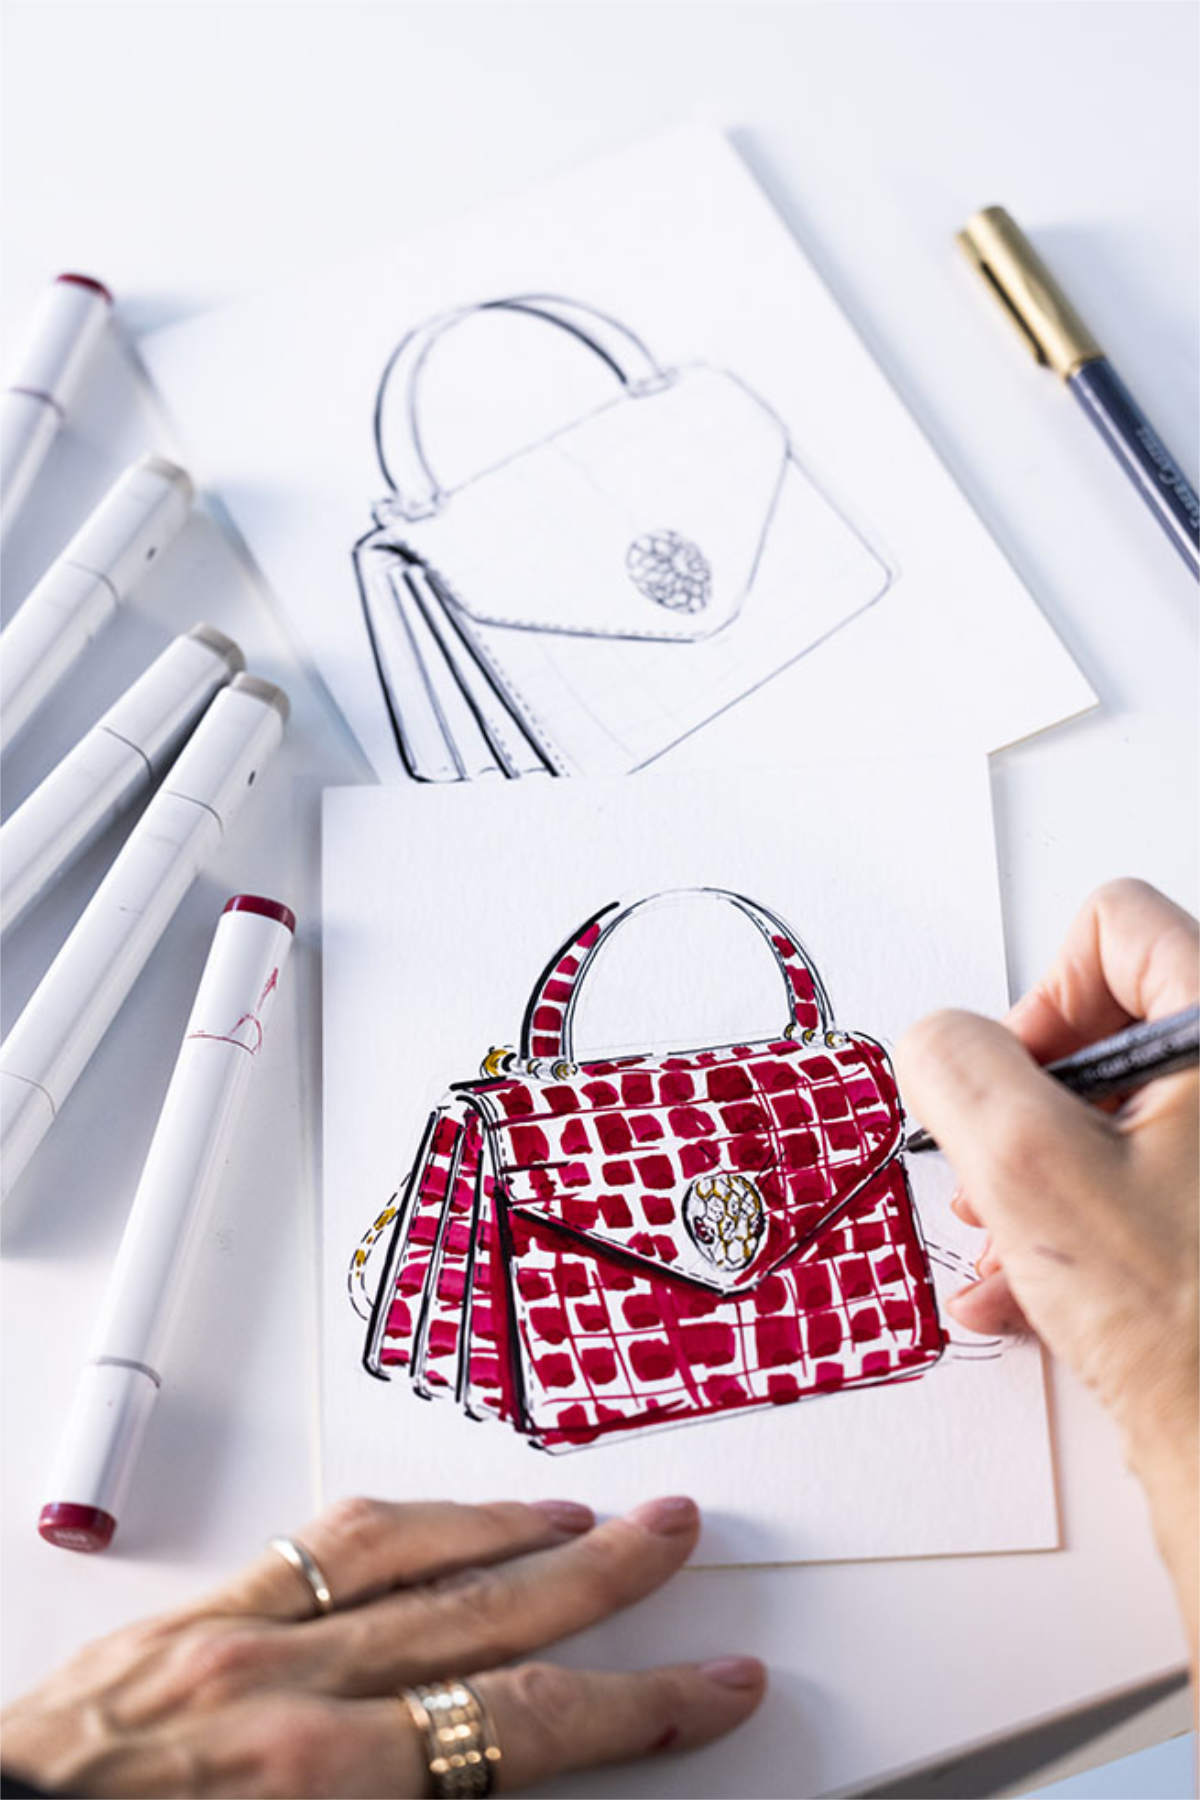 Bvlgari Presents Its New Magnifica Serpenti Forever Ruby One-of-a-kind Bag